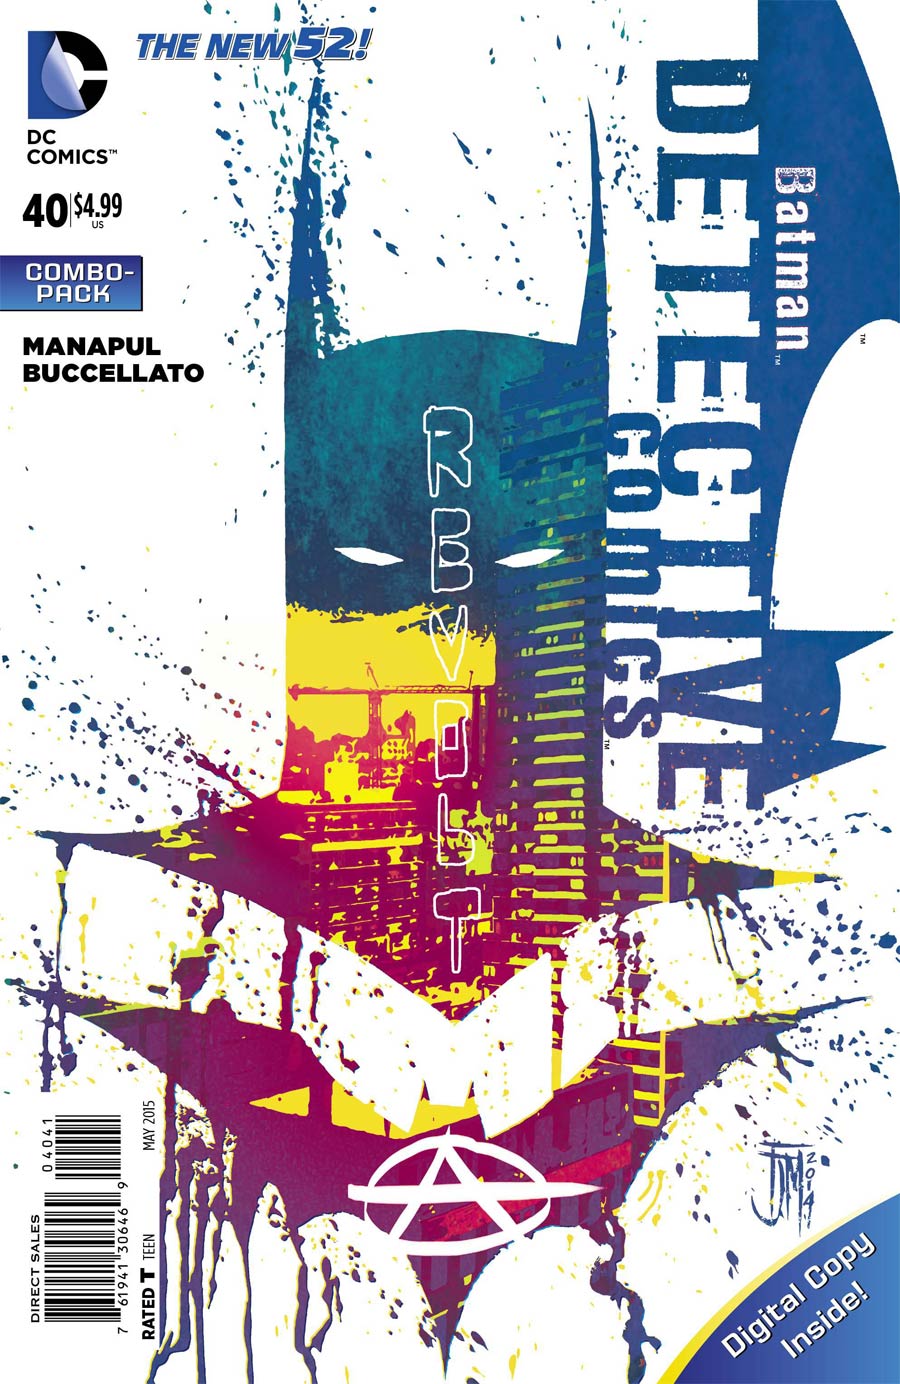 Detective Comics Vol 2 #40 Cover C Combo Pack With Polybag